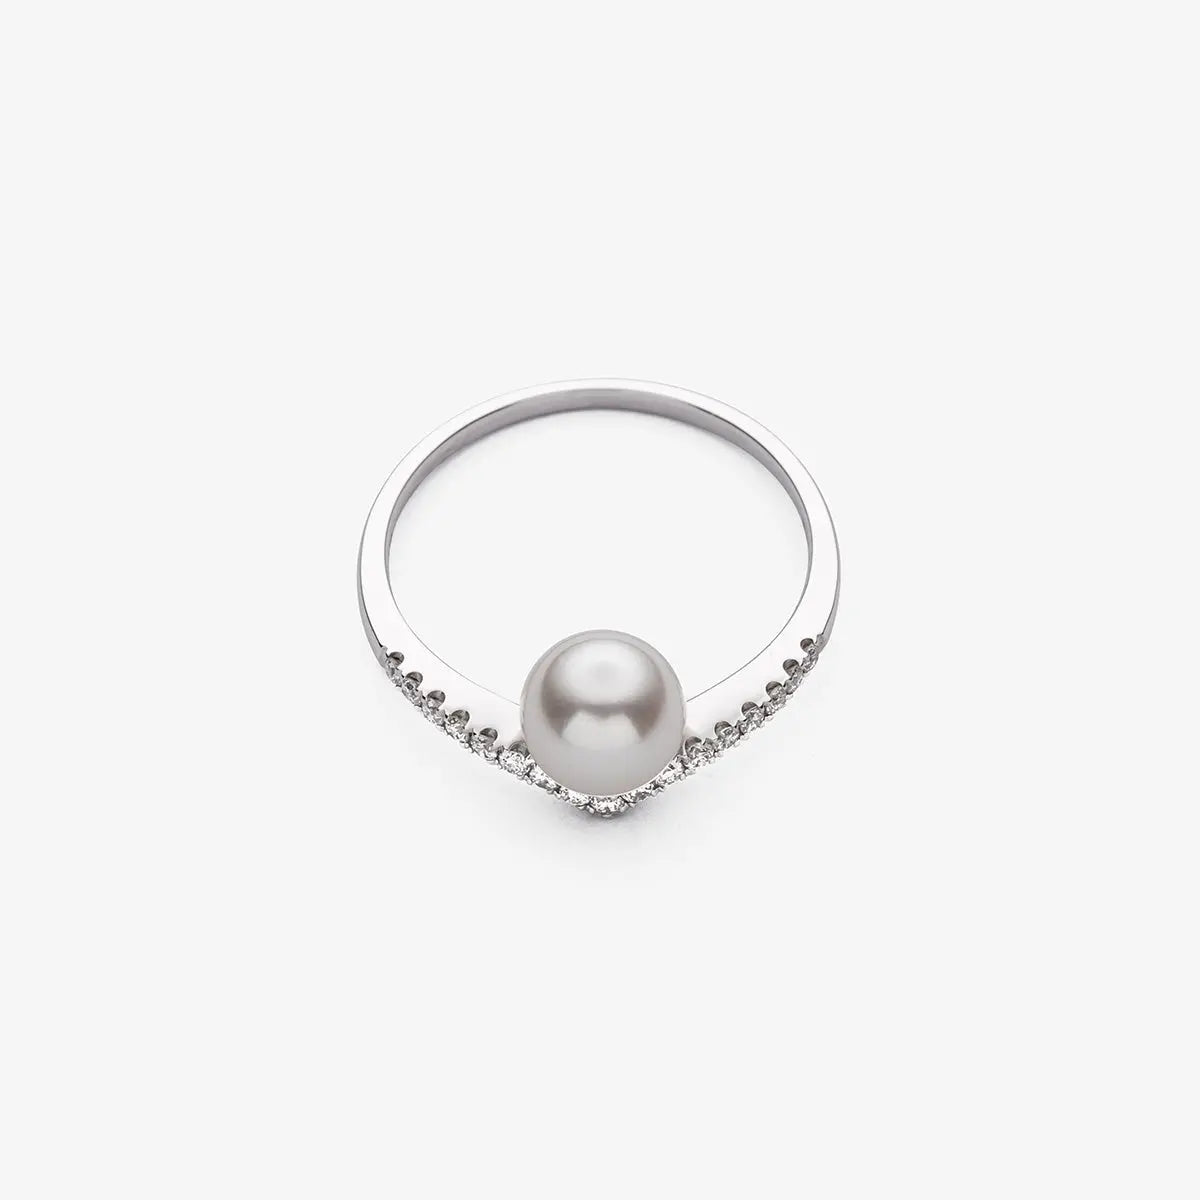 Protea Akoya White Pearl Ring in Gold with Diamonds - 8mm